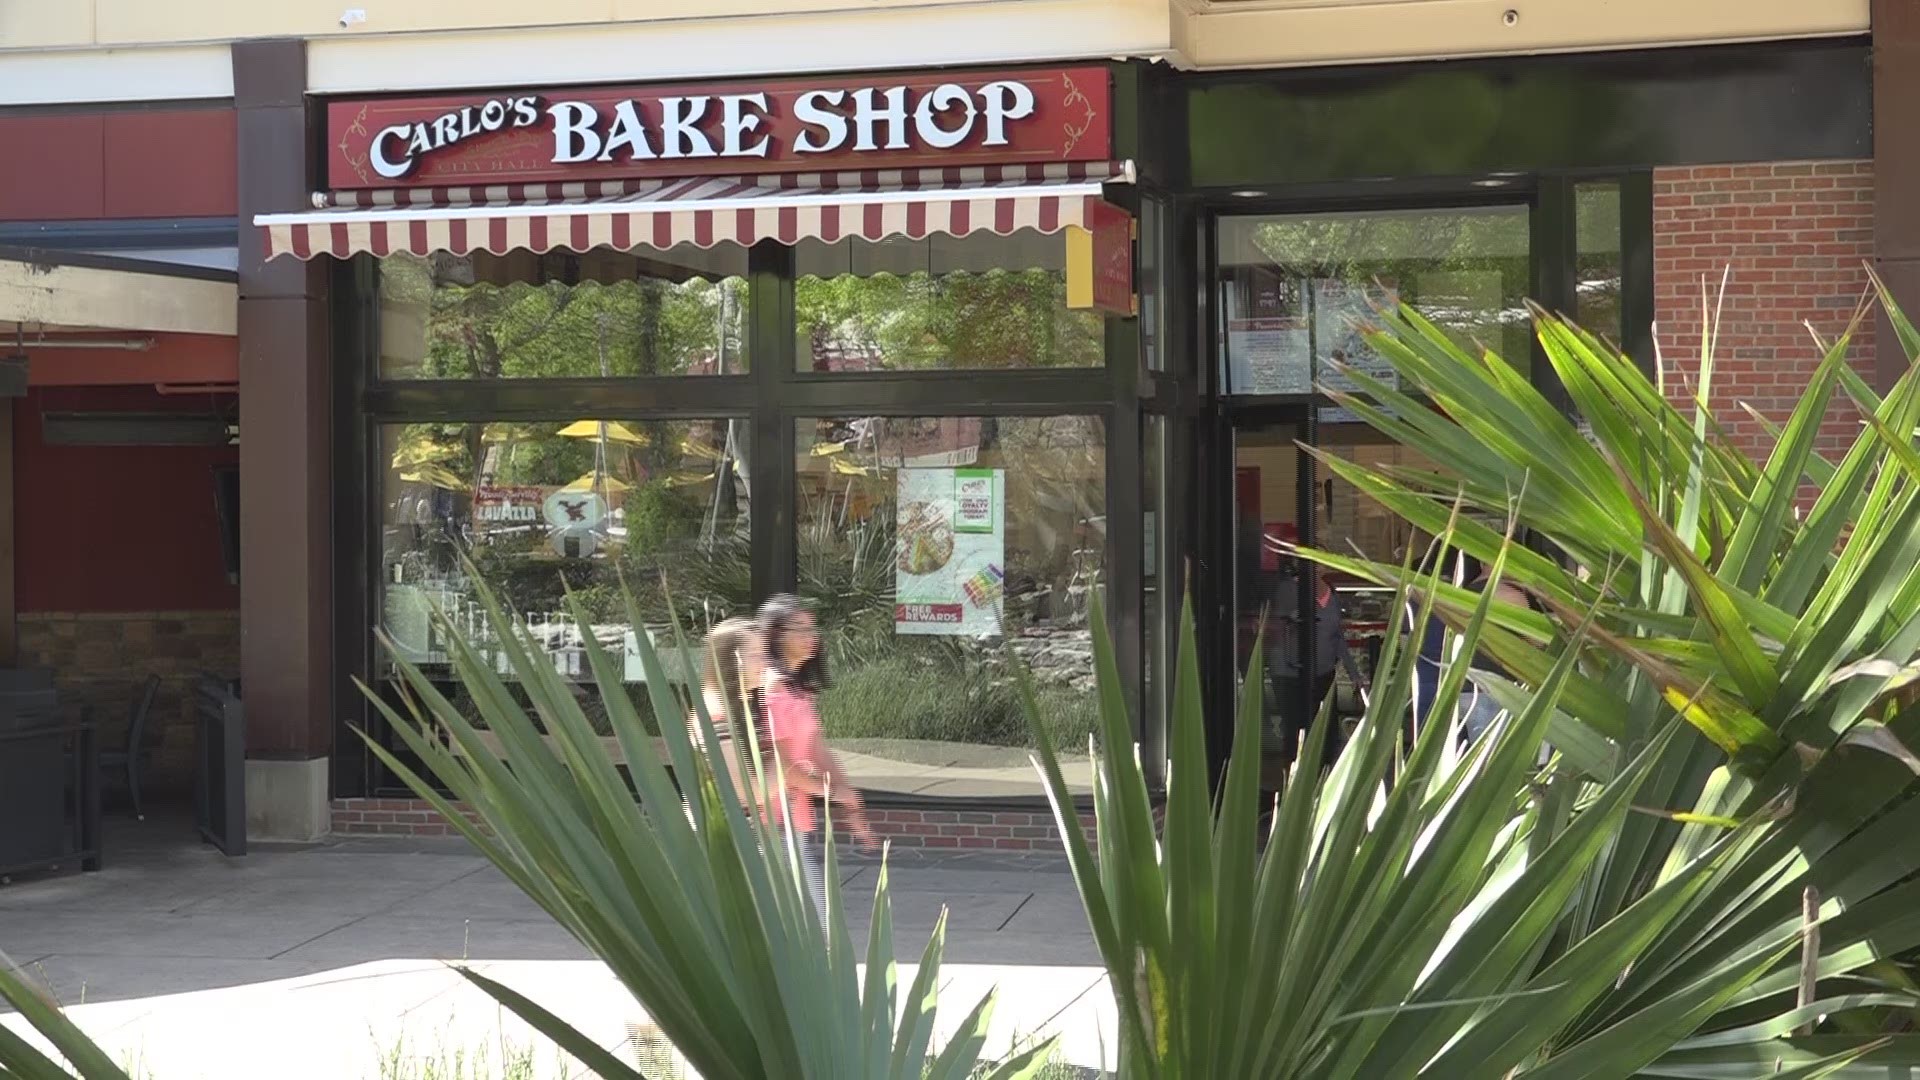 Carlo's Bakery, from the Cake Boss Buddy Valastro, will give its 314th customer on Thursday a gift card worth $314. The bakery opened last year and is located at the Shops at La Cantera near Kona Grill.